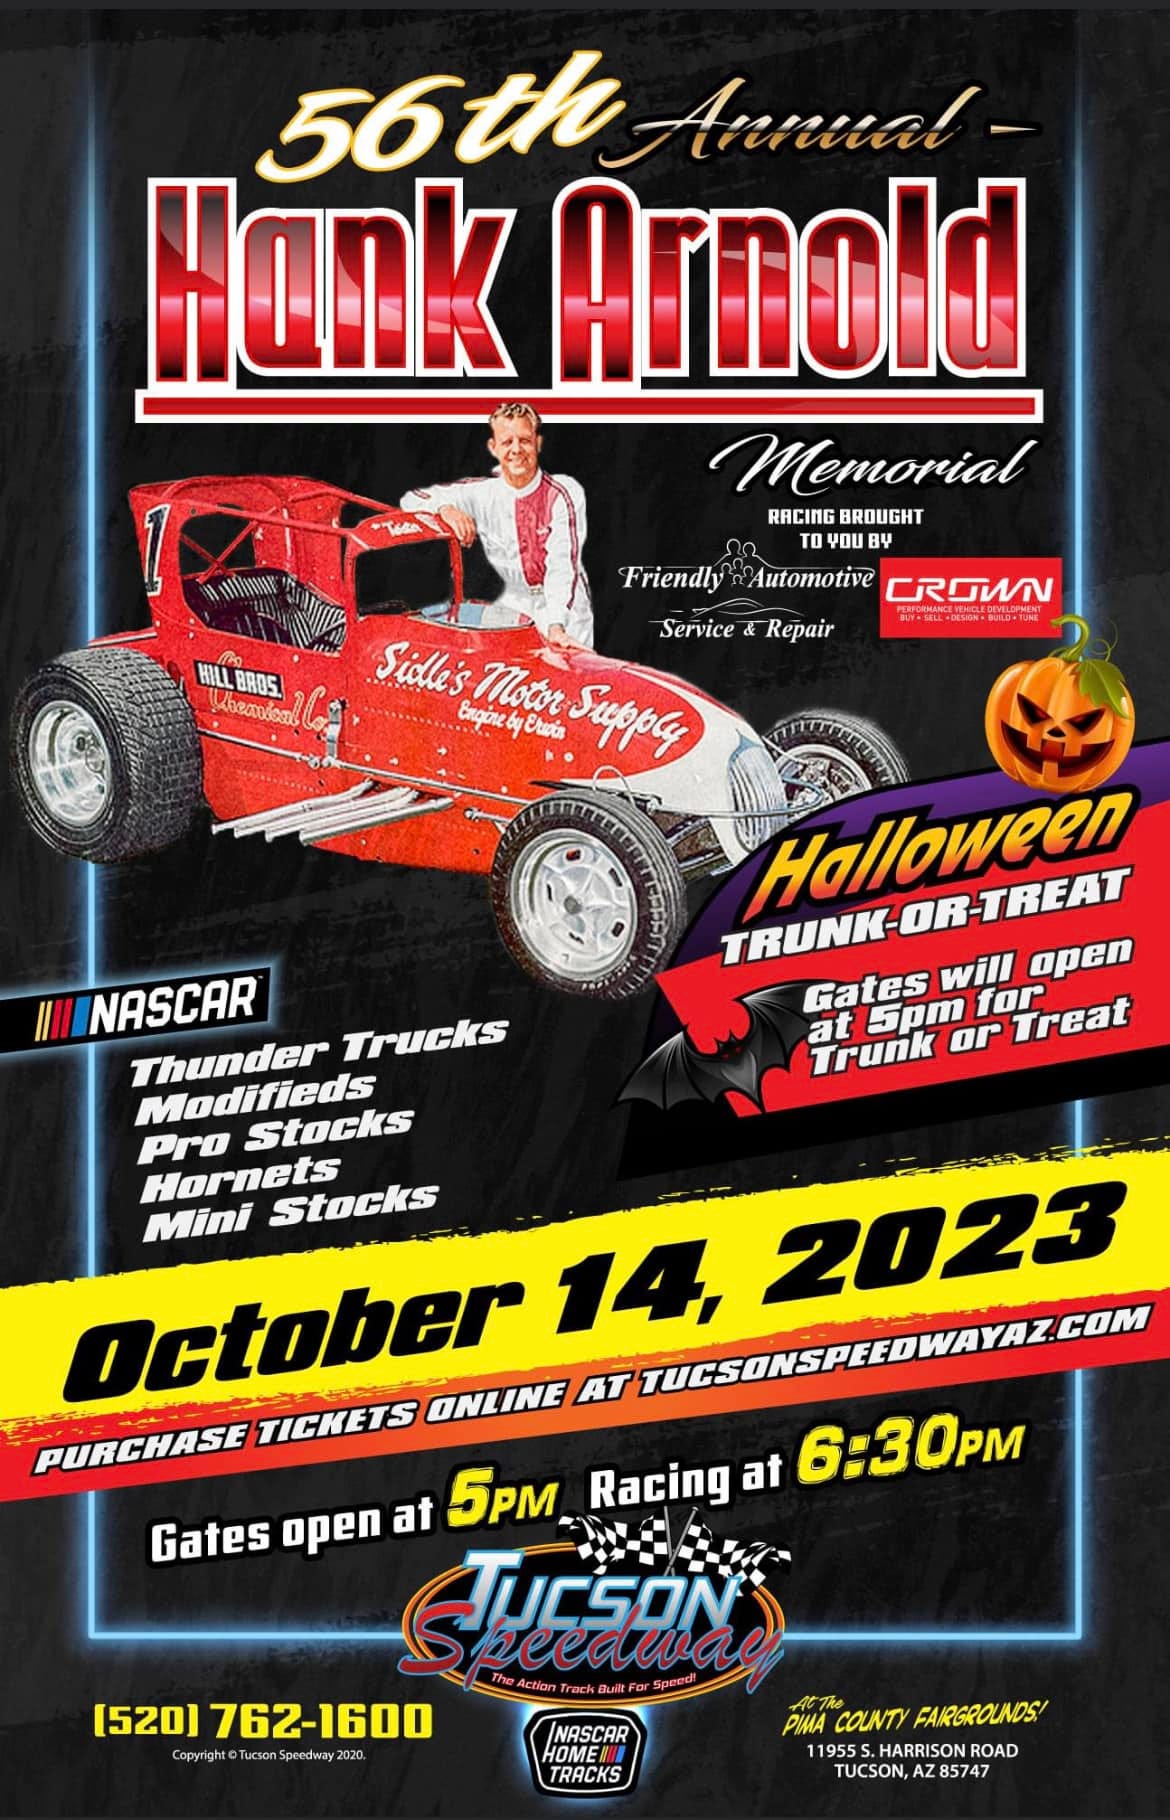 May be an image of 1 person and text that says 'ANARAE ILLBROS Aheaodoml 56th Hank Arnold Memorial RACING BROUGHT YOUBY Friendly Automotive CROWN Service Repair BUYSELEODoLDTU Sidle's Motor Supply Enginbys TRUNK-OR-TREAT TRUNK-OR-TREAT Halloween will open Gates 5pm Trunk at or for Treat NASCAR Thunder Trucks Pro Modifieds Stocks Hornets Mini Stocks October ONLINE AT 14, 2023 PURCHASE TICKETS Gates open at 5PM Racing at 6:30PM STUGSON [520) 762-1600 PIMA COUNTY FAIRGROUNDS! 1955S RD TUCSON,AZ85747 NASCAR HOME TRACKS'